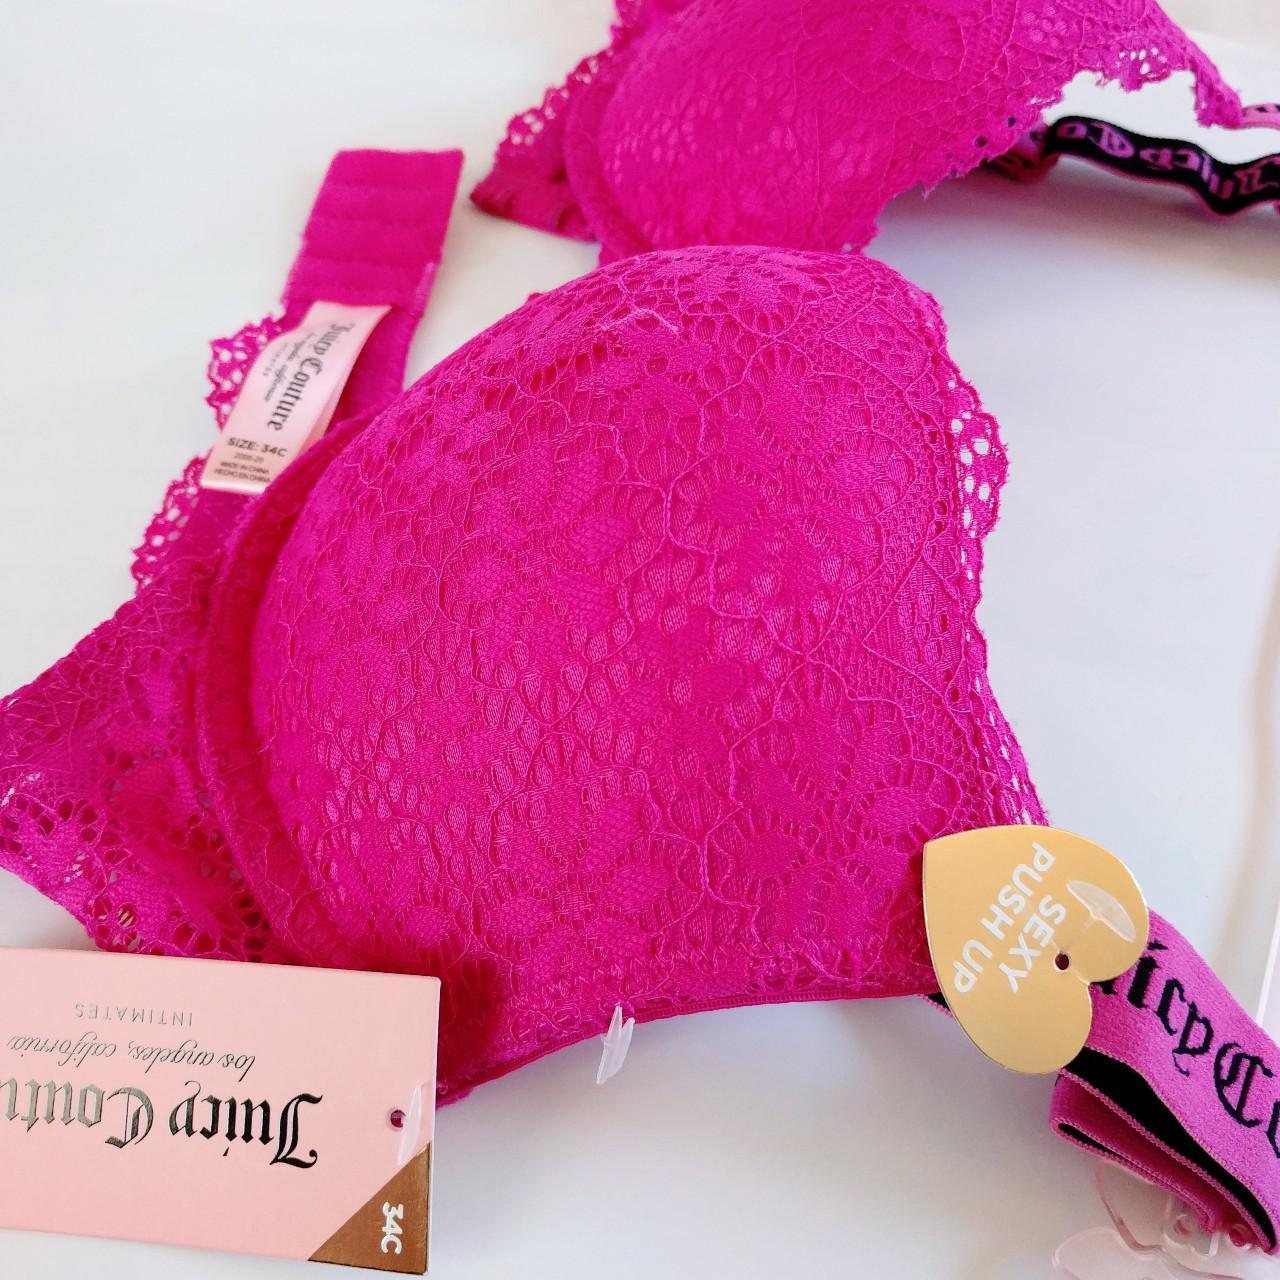 JUICY COUTURE BRAND NEW SEXY PUSH UP BRA SIZE 34C